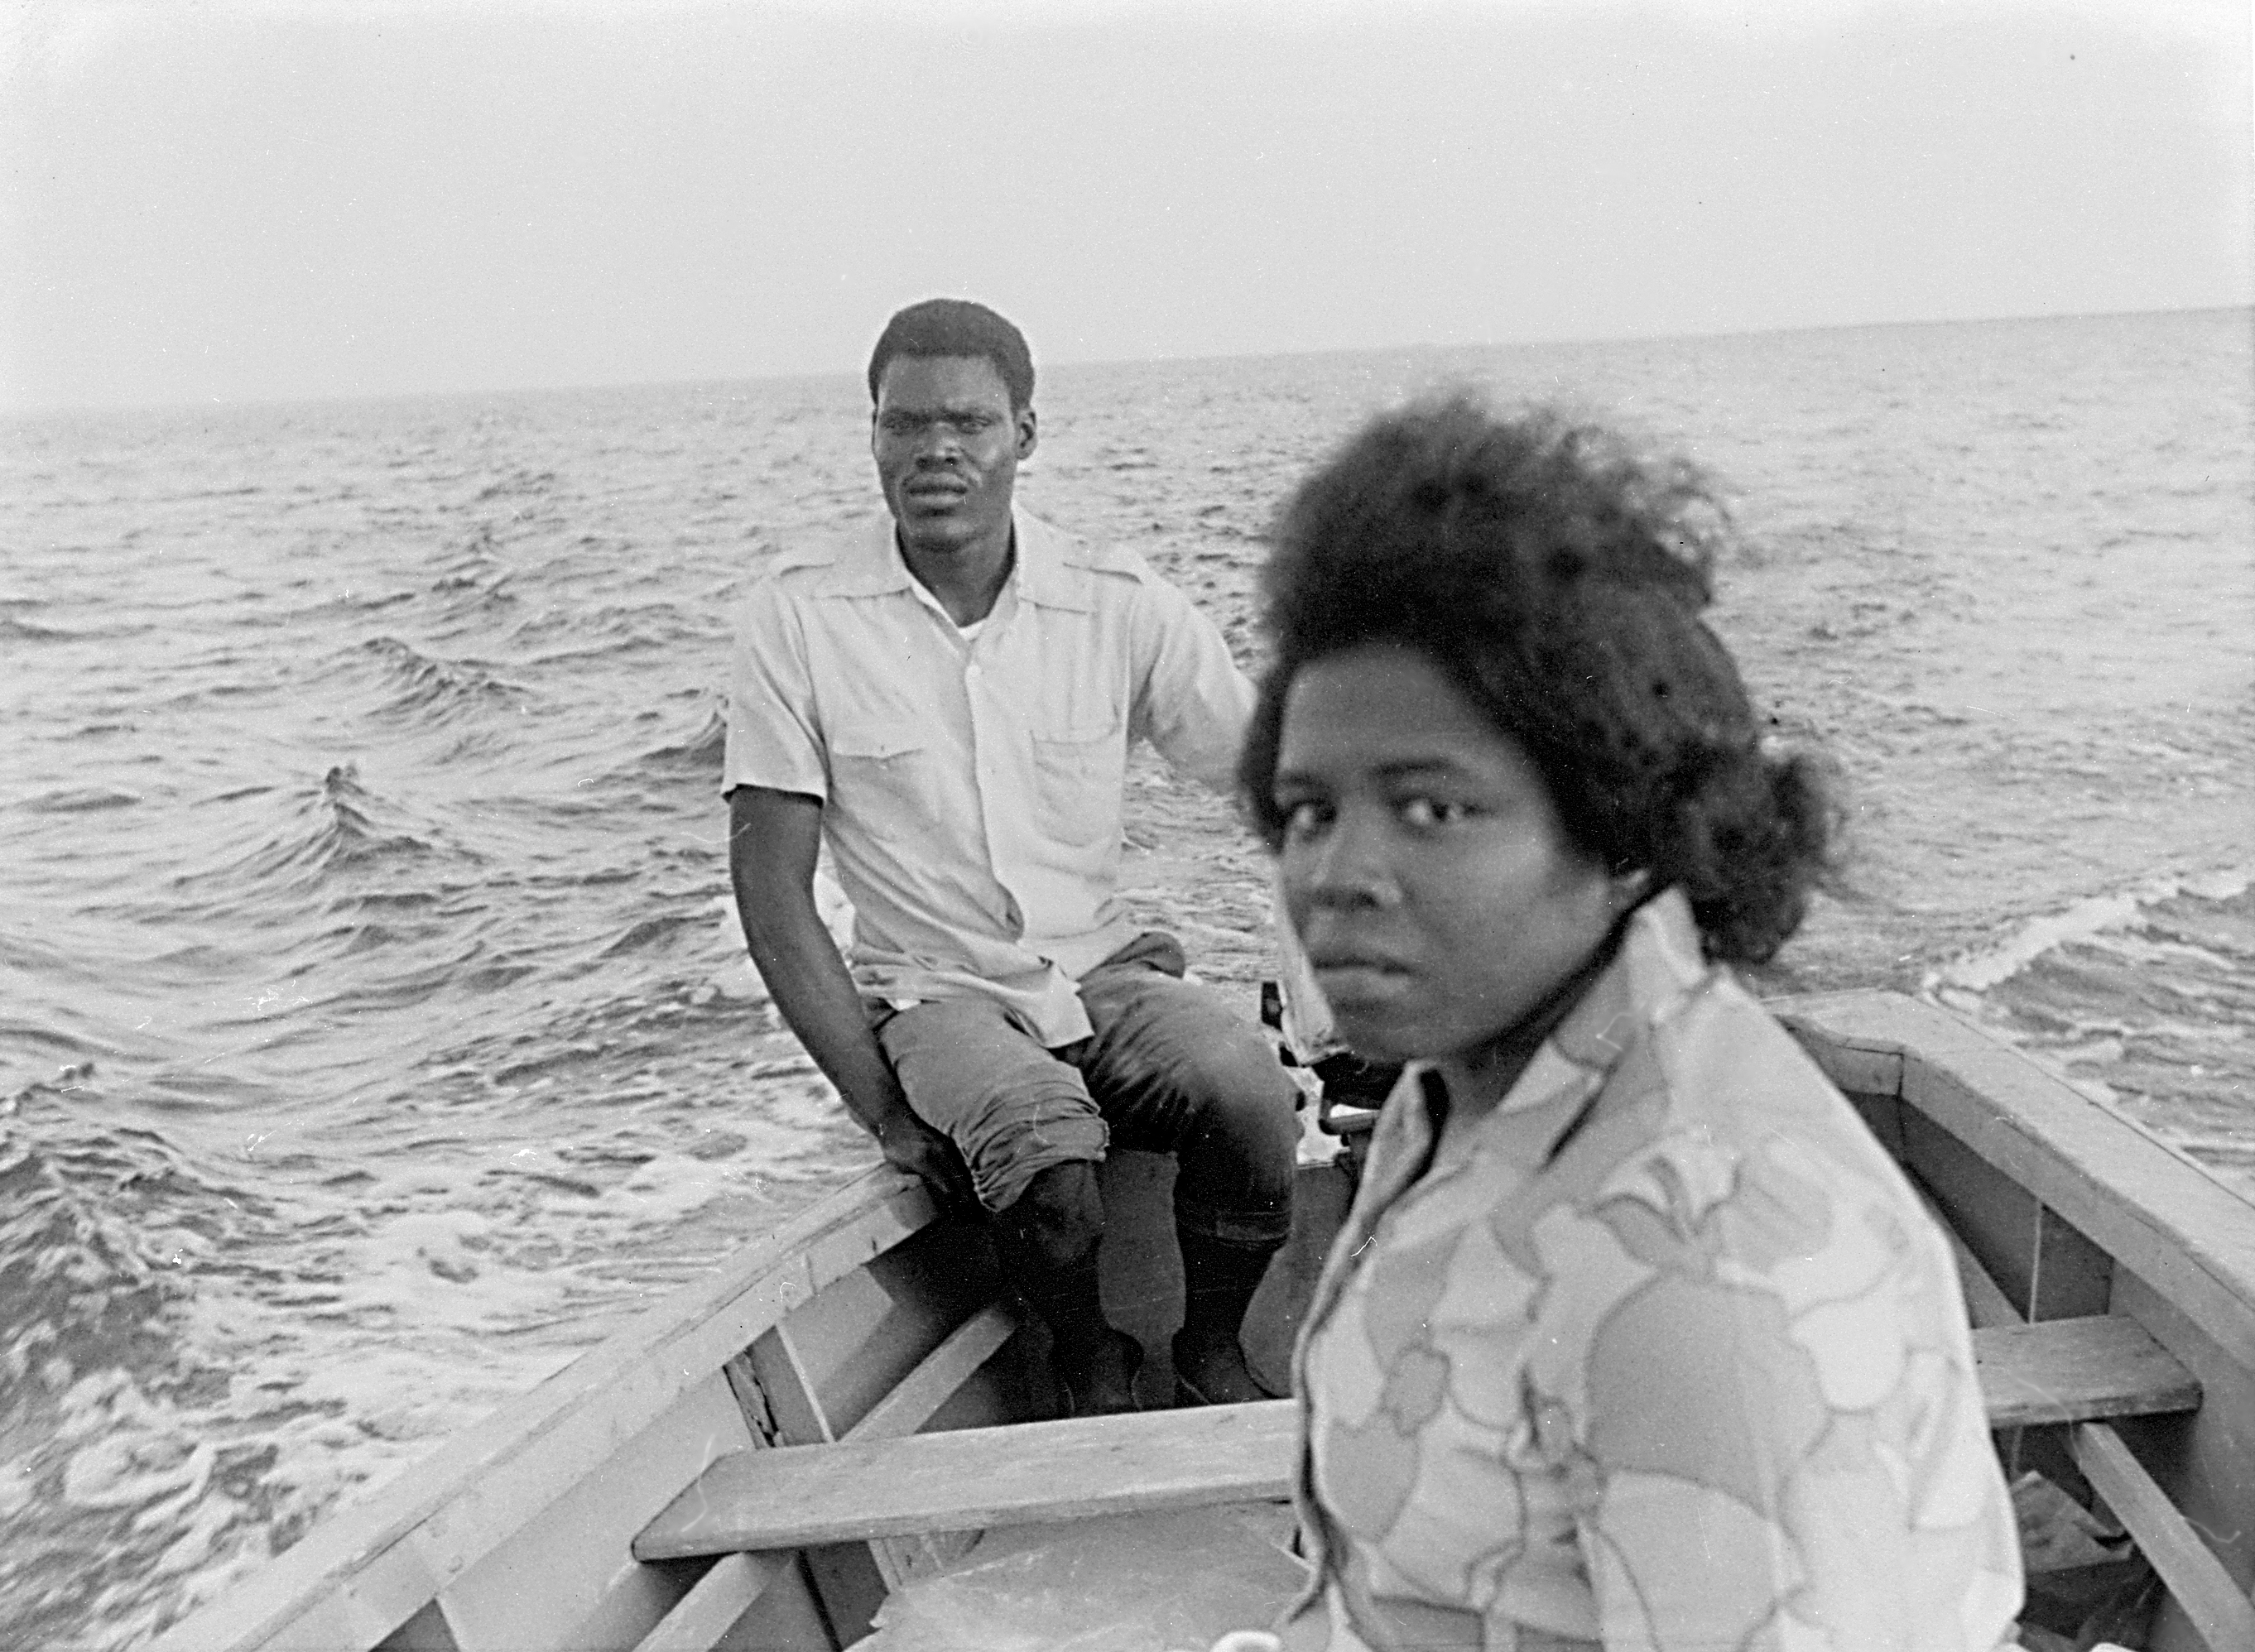 The Poitiers en route to Water Cay, 1971